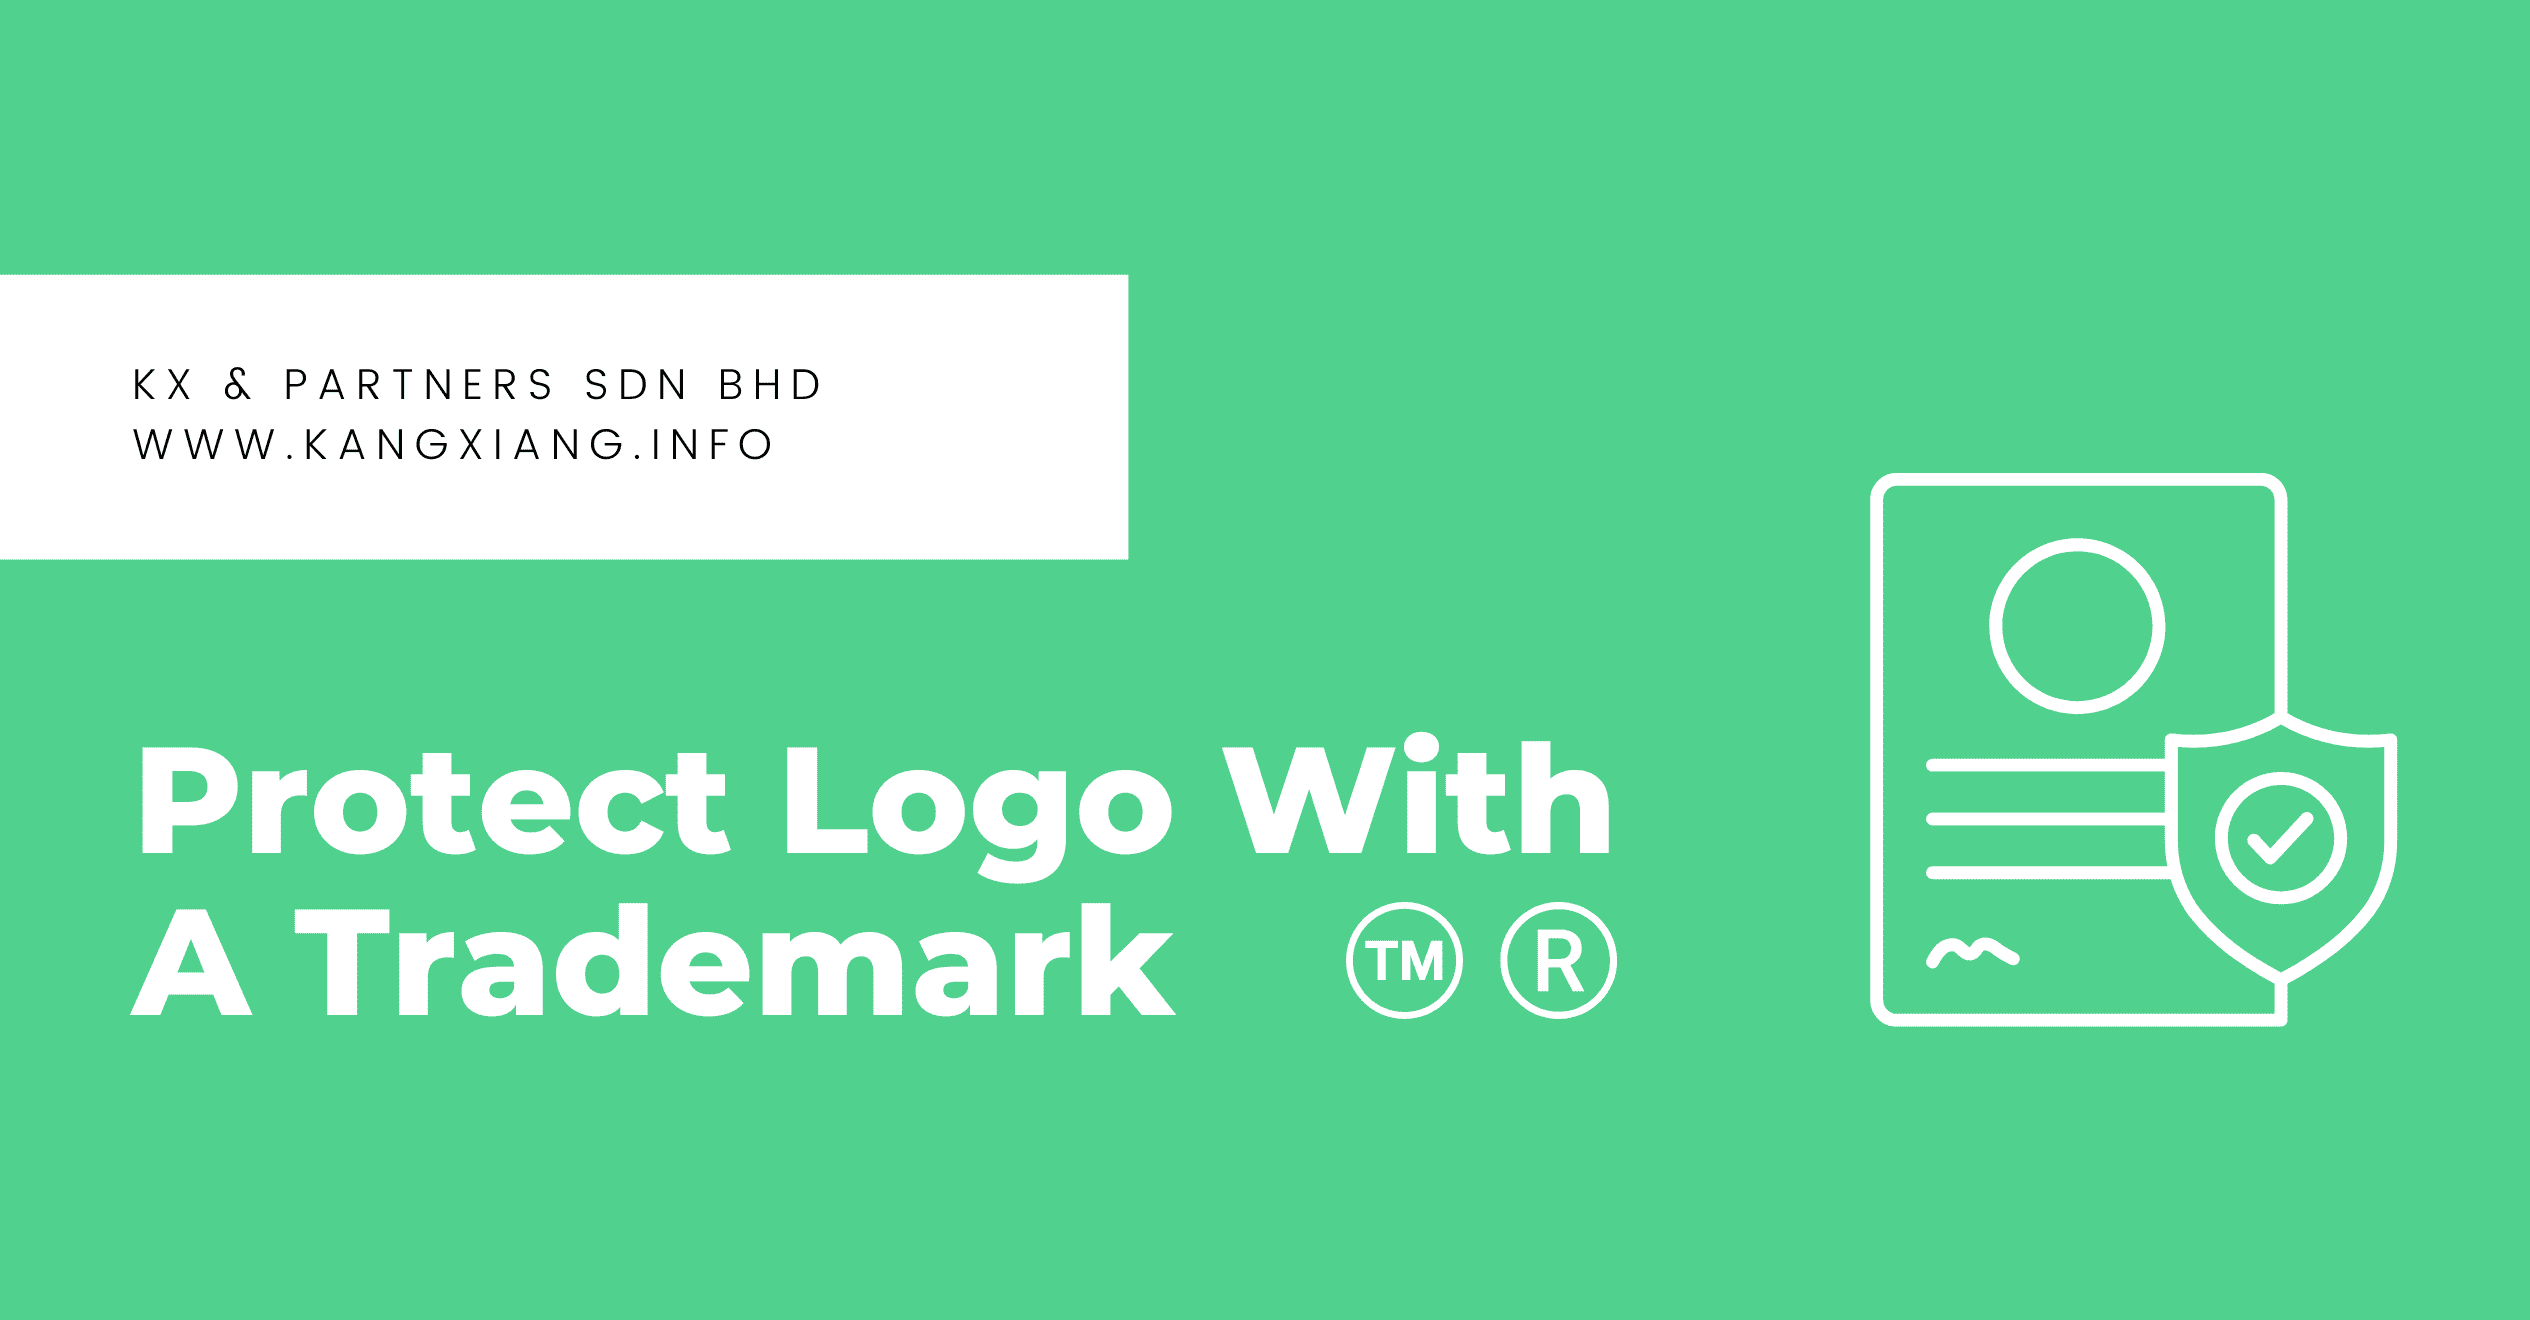 How Do I Protect My Logo With A Trademark in Malaysia?